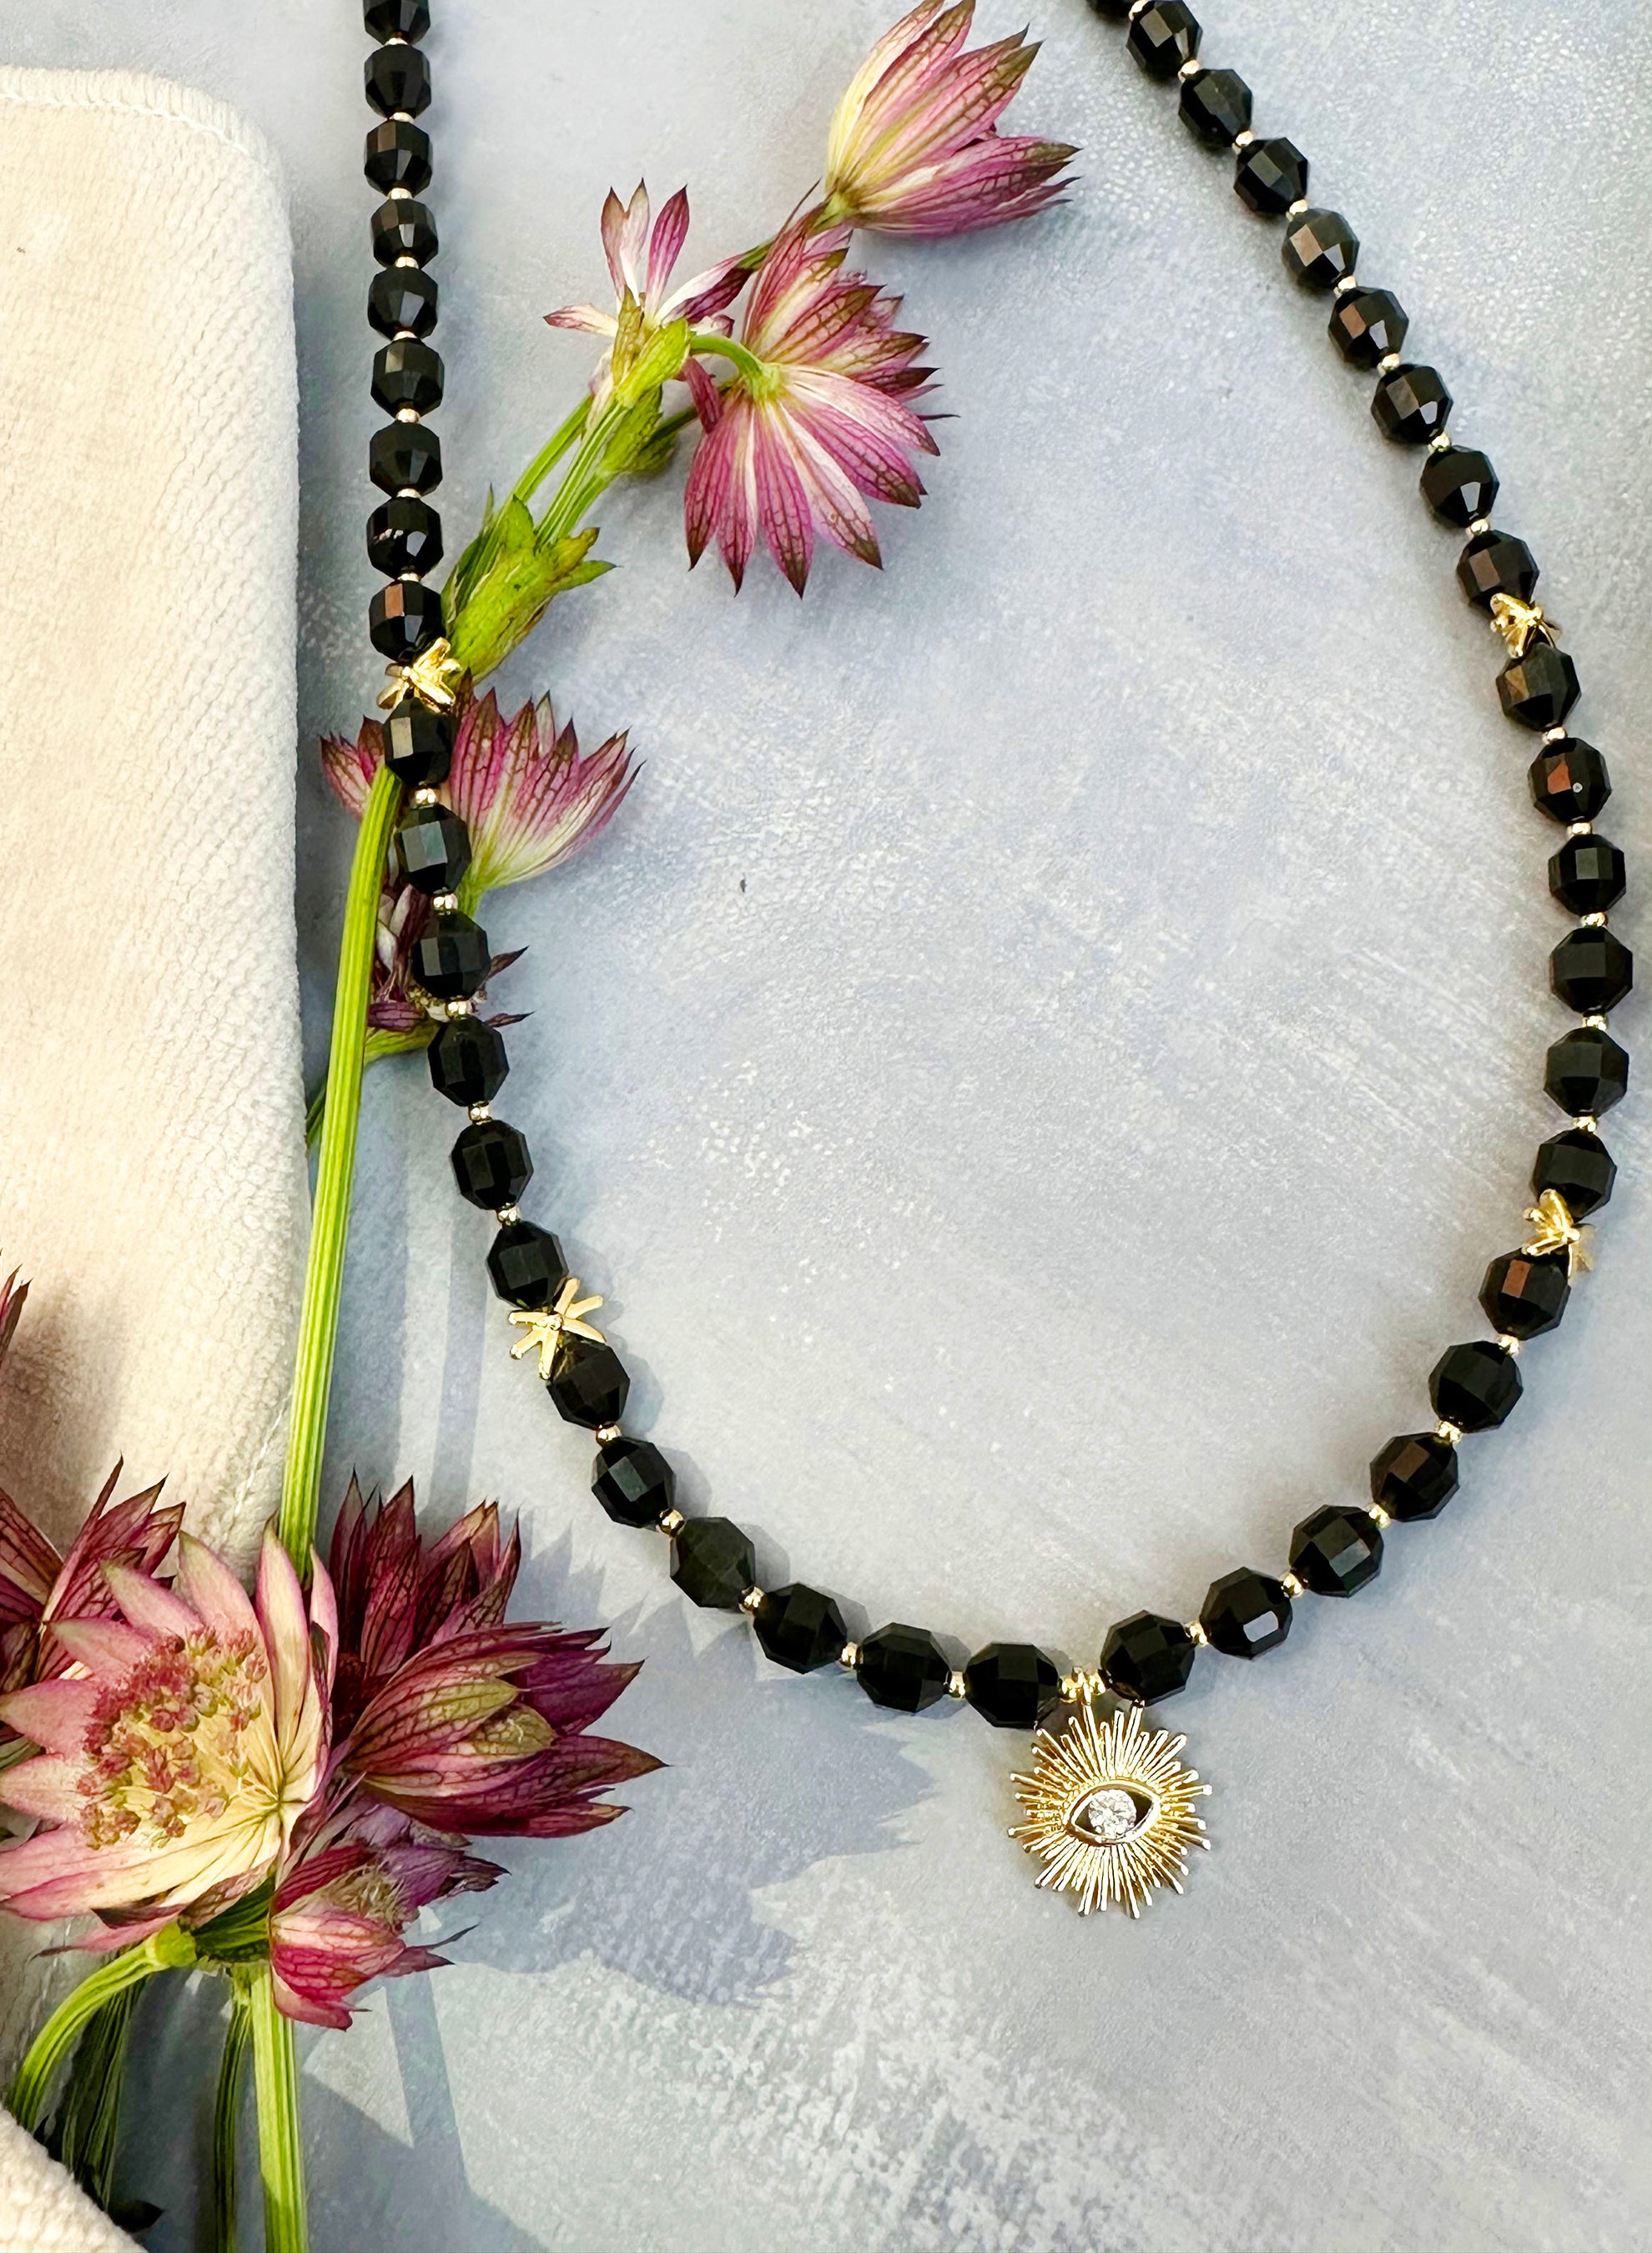 Black Obsidian With Evil Eye Charms Double Layers Bracelet Or Choker by  Farra